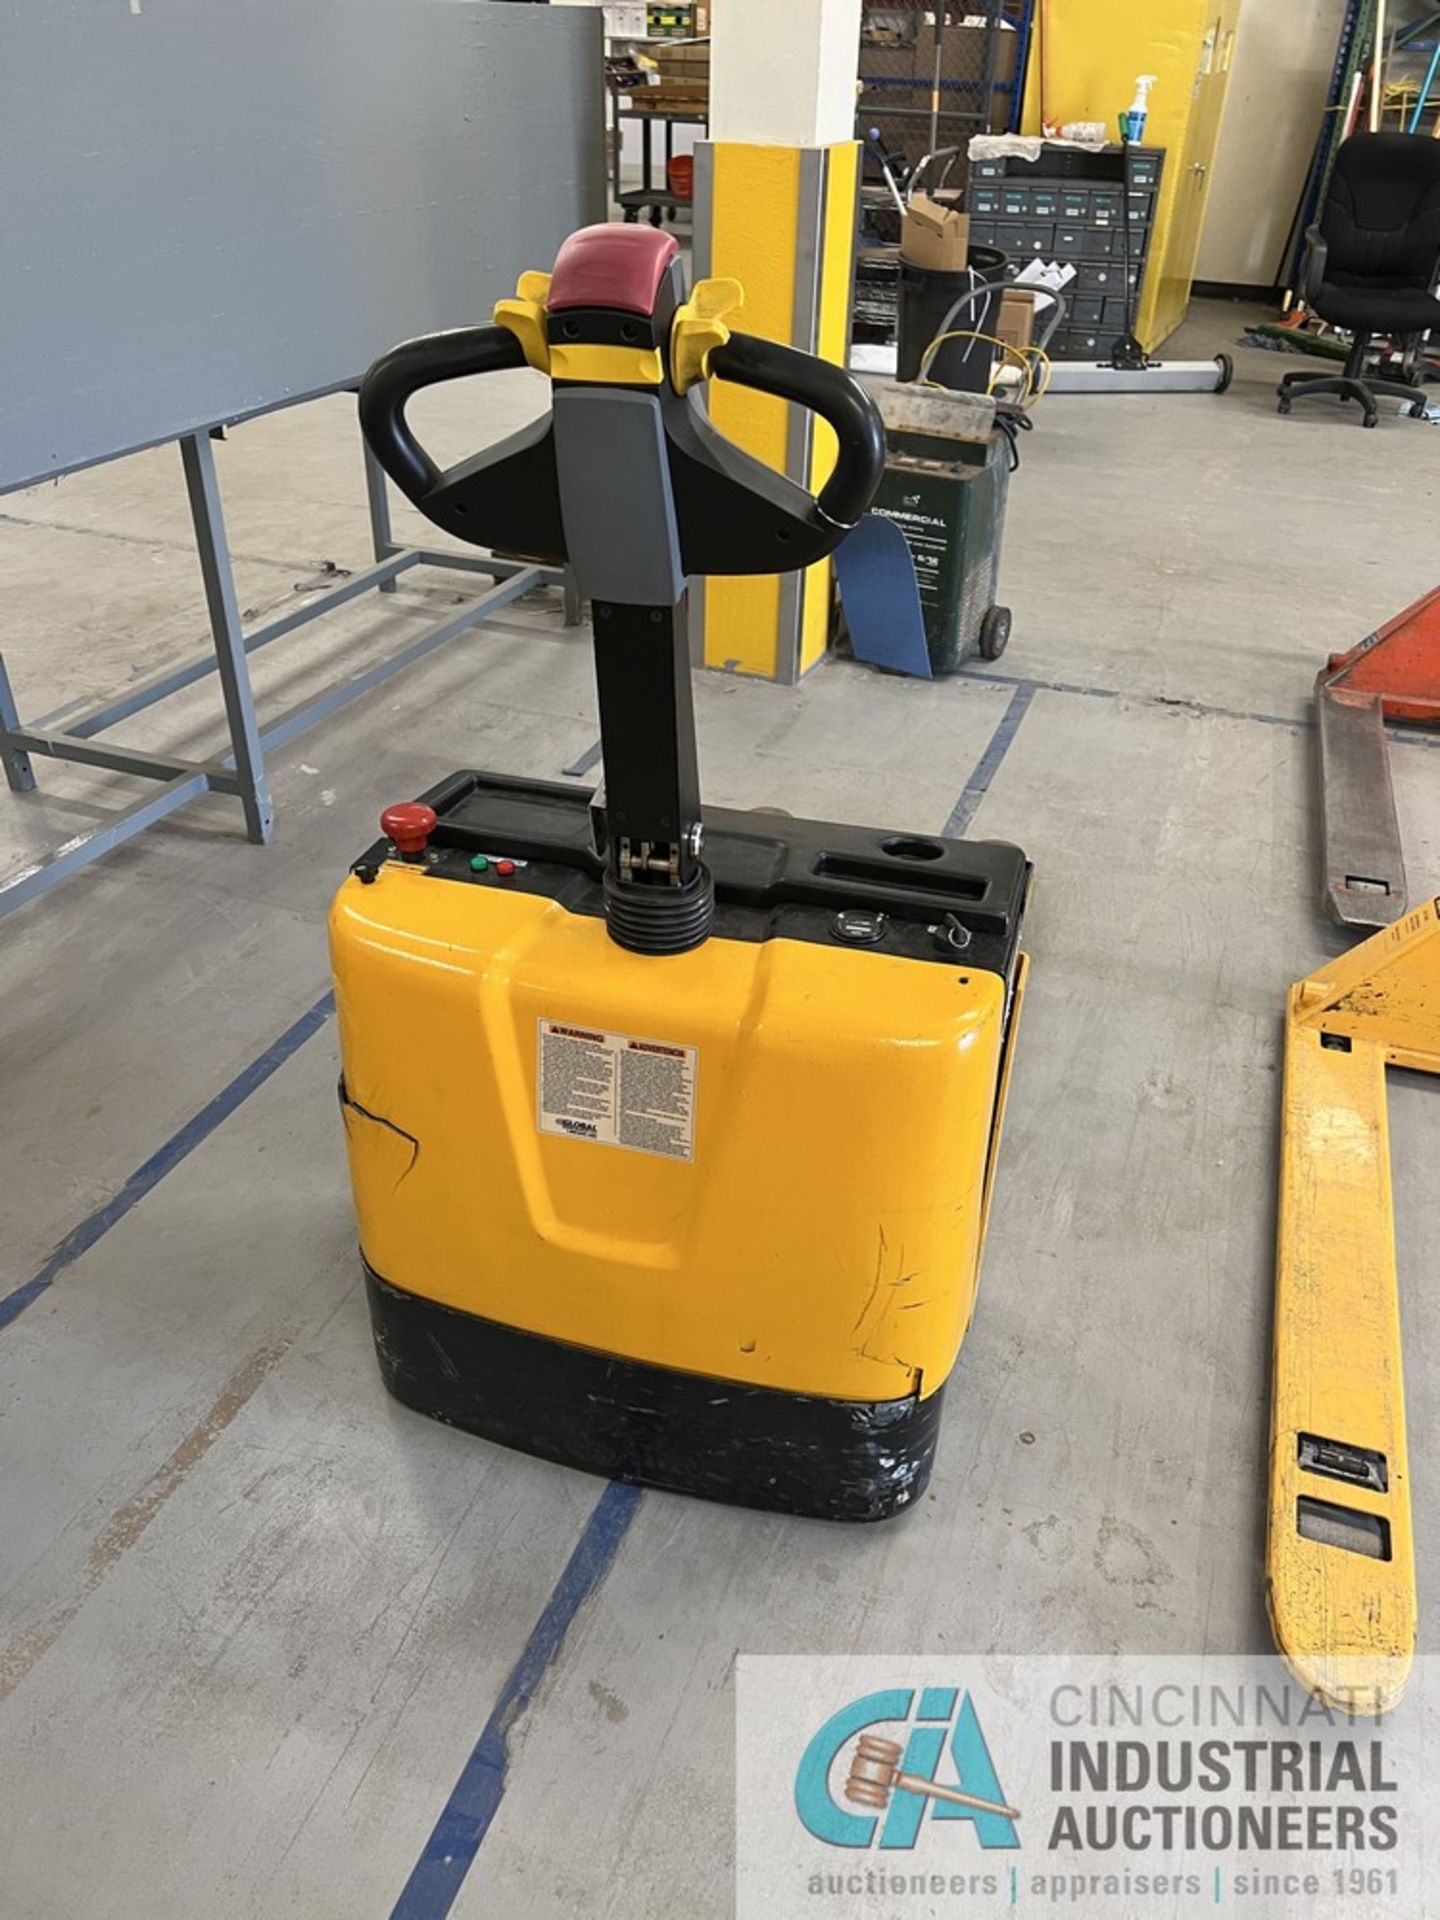 3,300 LB. GLOBAL MODEL RA15W ELECTRIC PALLET TRUCK; S/N 16117657, 24 VOLT (NEW 2016) (WAREHOUSE) - Image 2 of 4